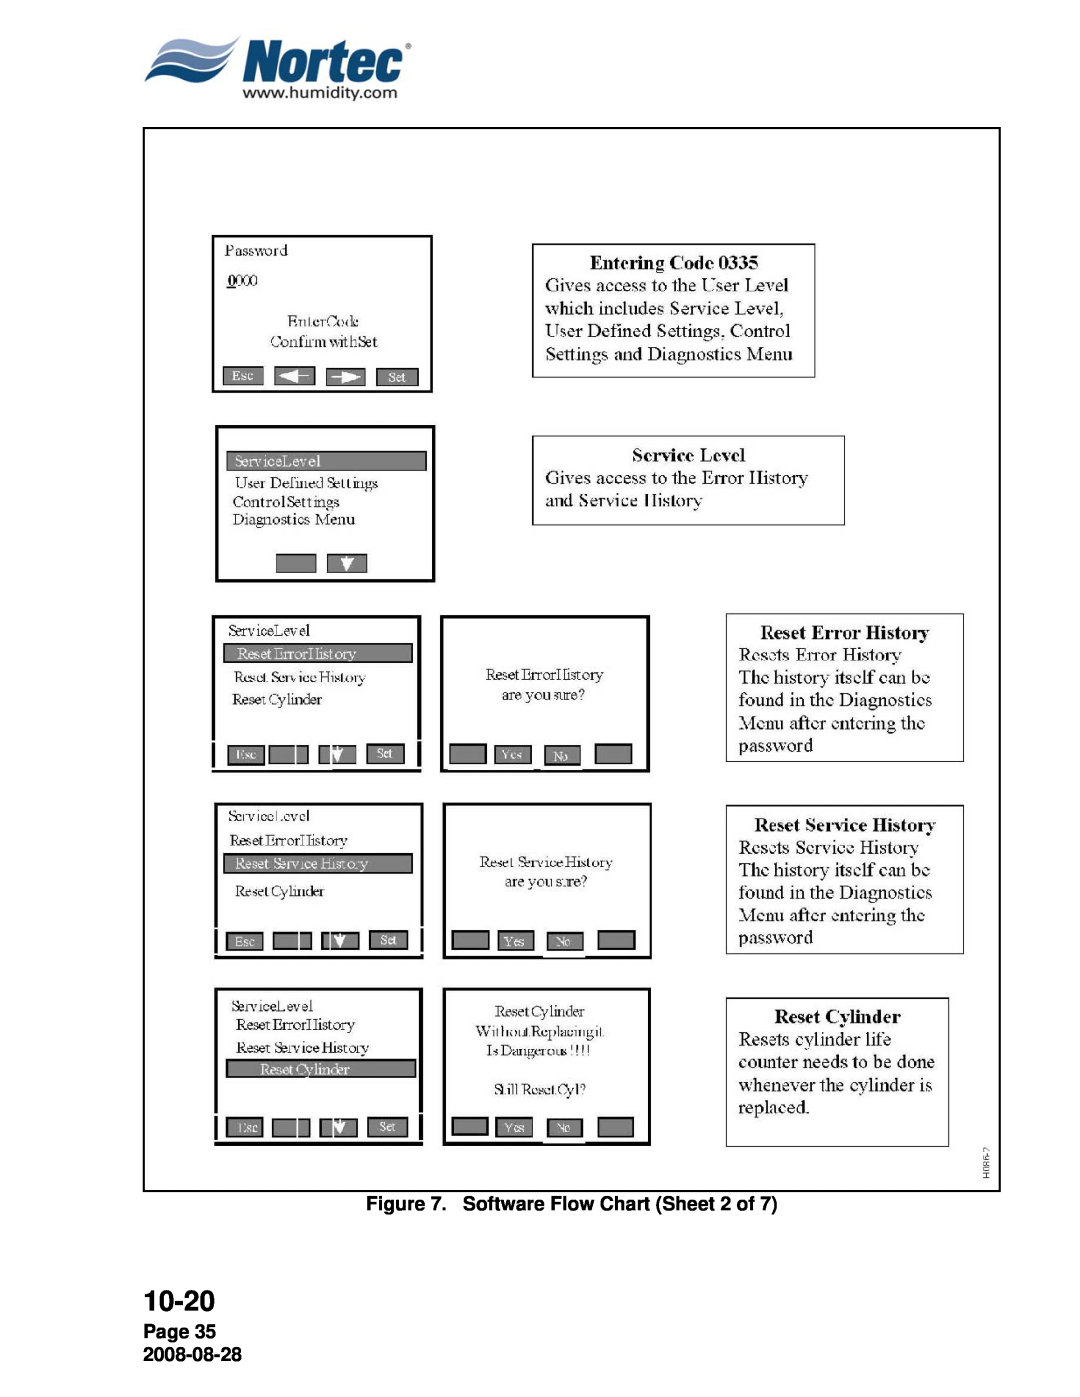 Nortec NH Series installation manual Software Flow Chart Sheet 2 of, Page 35, 10-20 